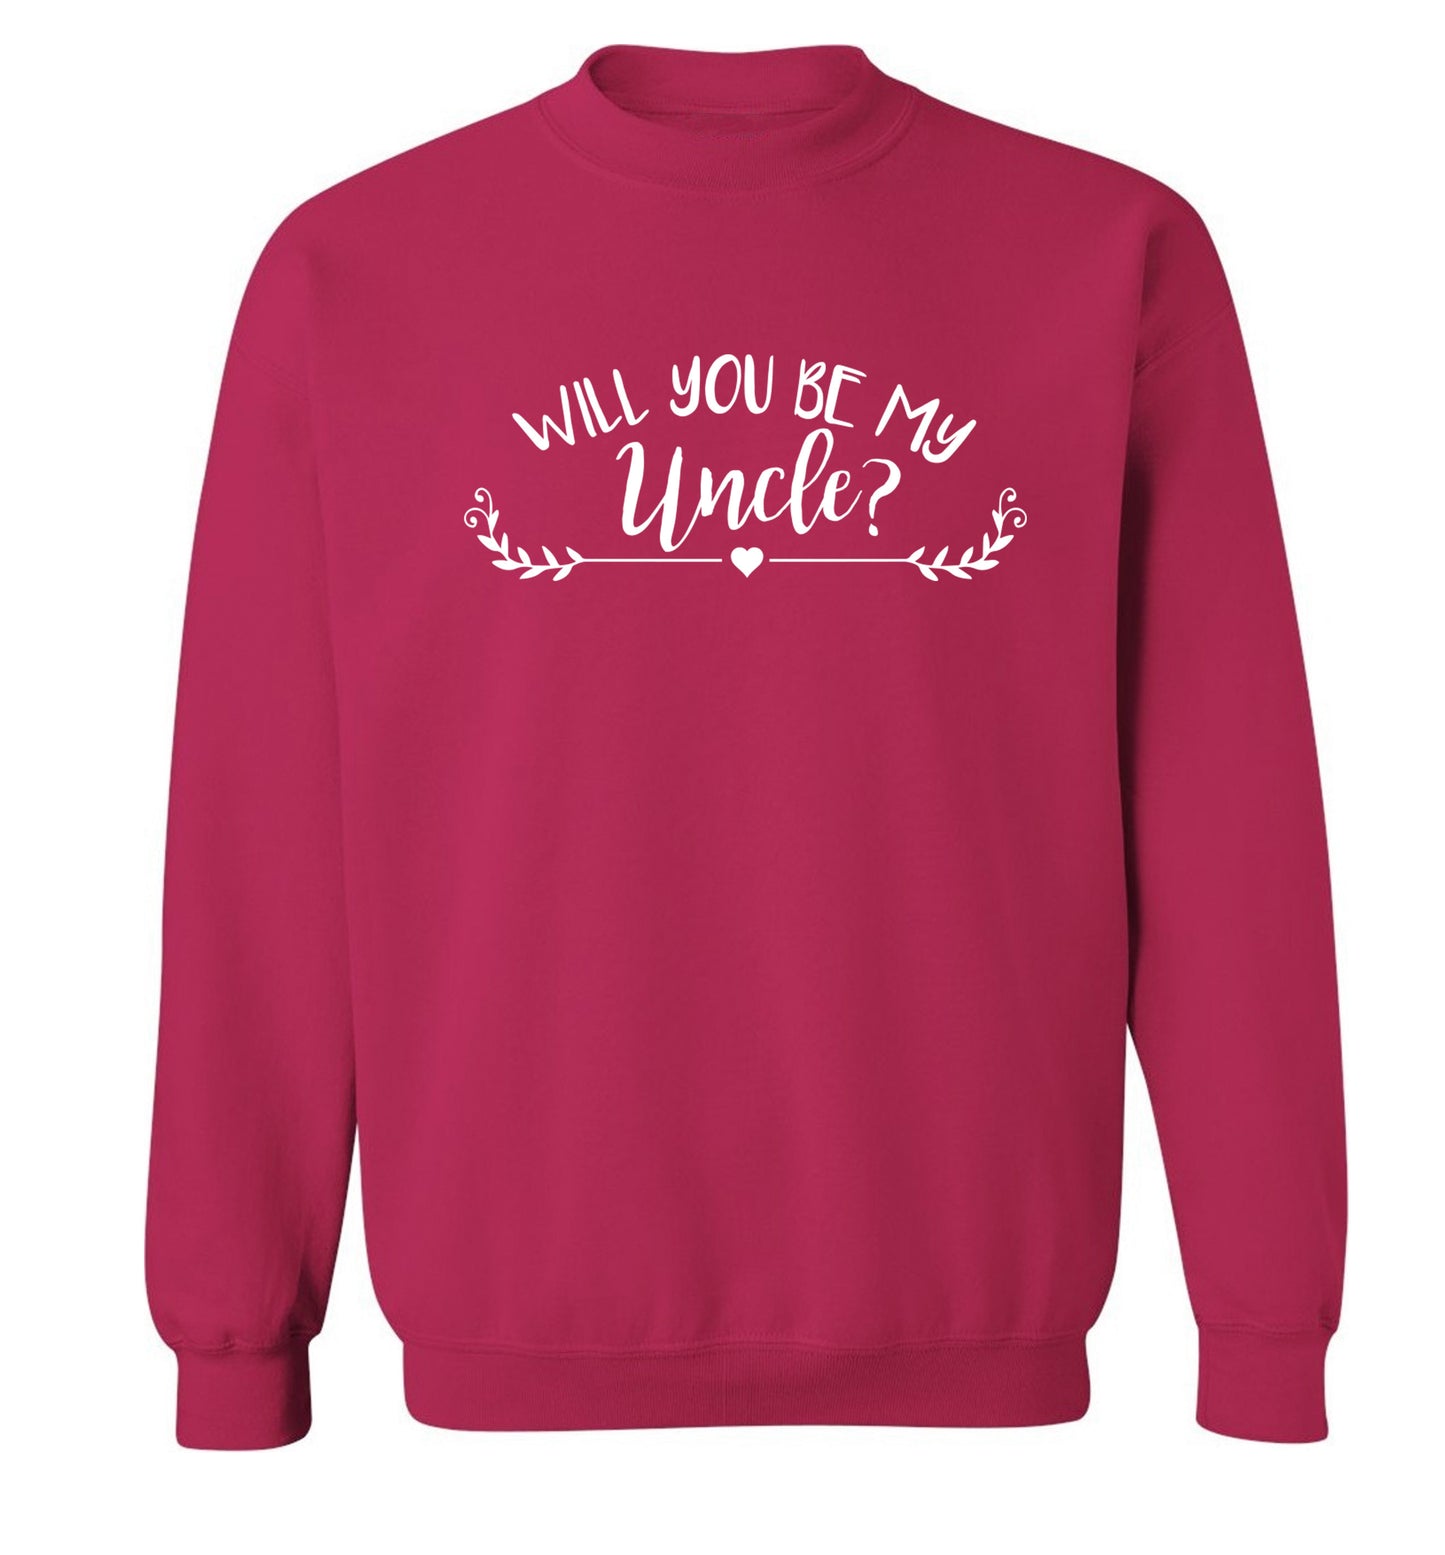 Will you be my uncle? Adult's unisex pink Sweater 2XL